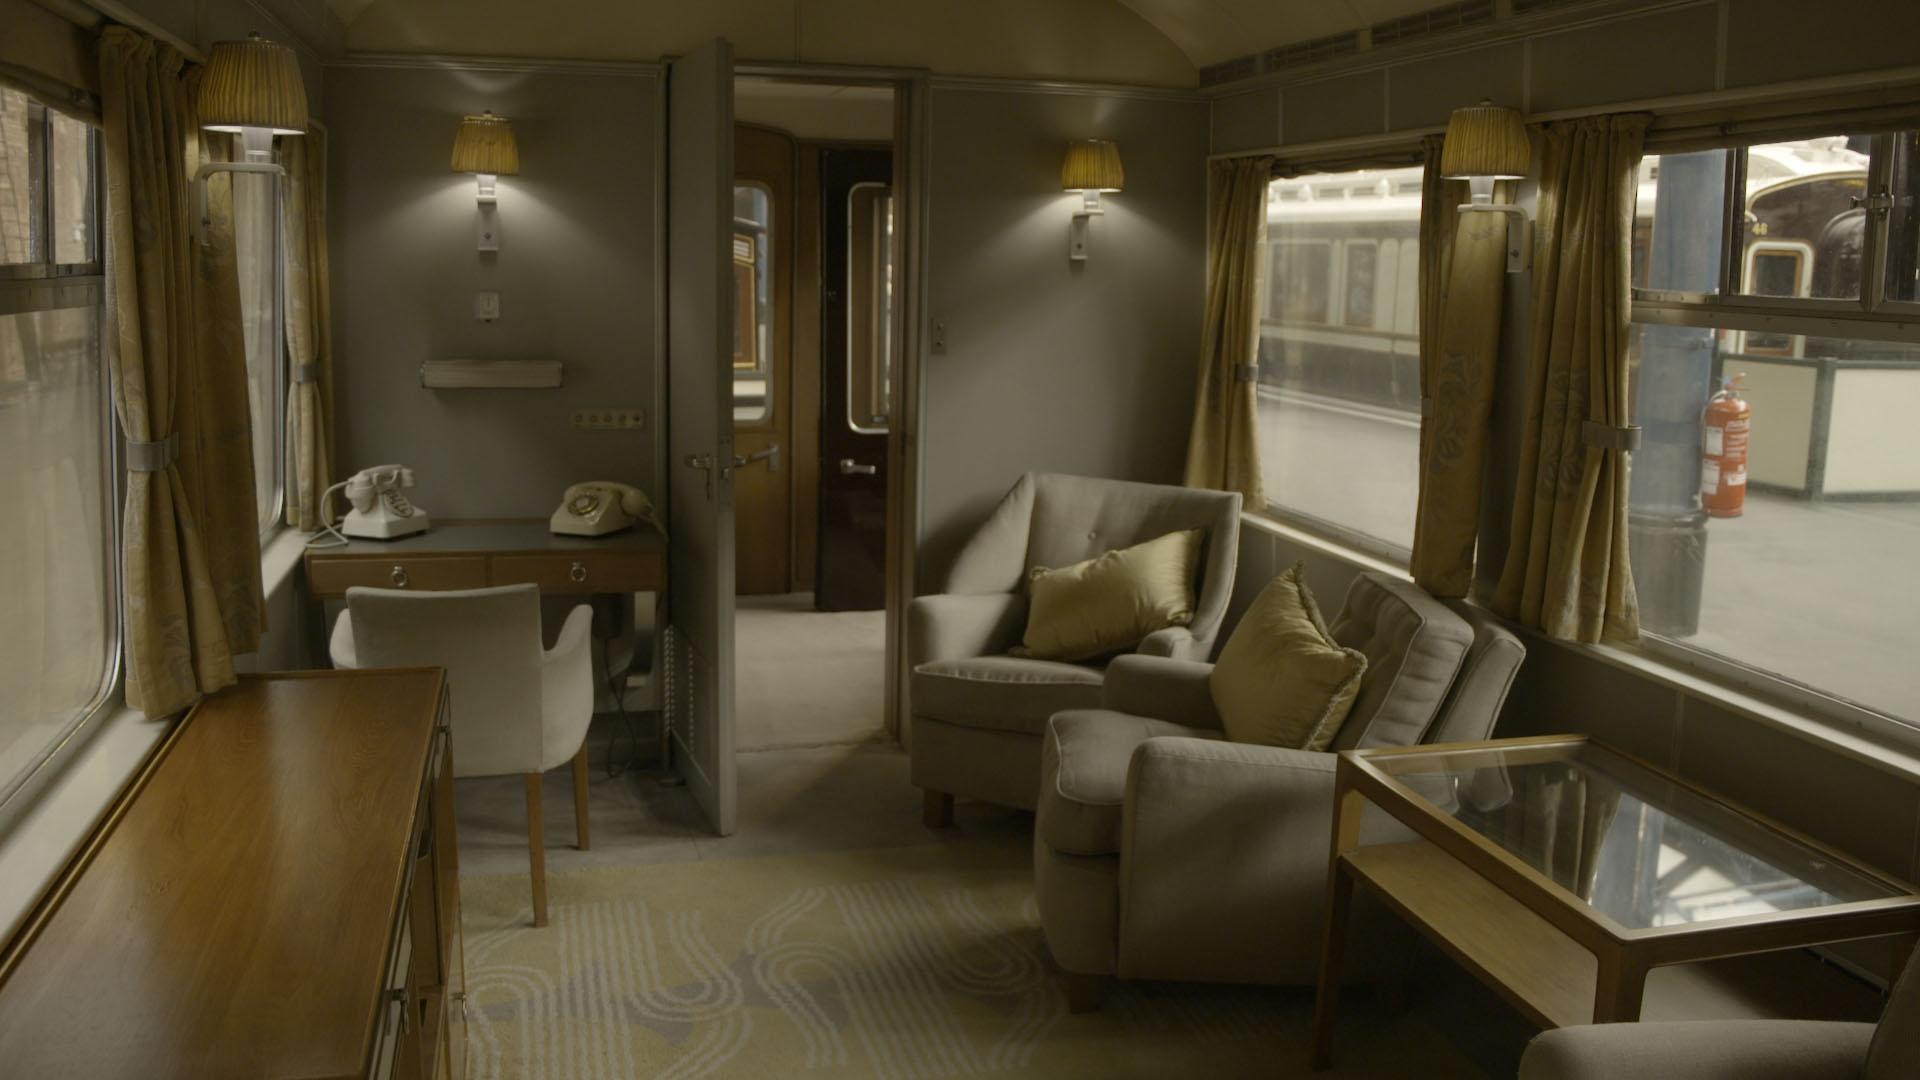 An interior view of the World War II royal train carriage.